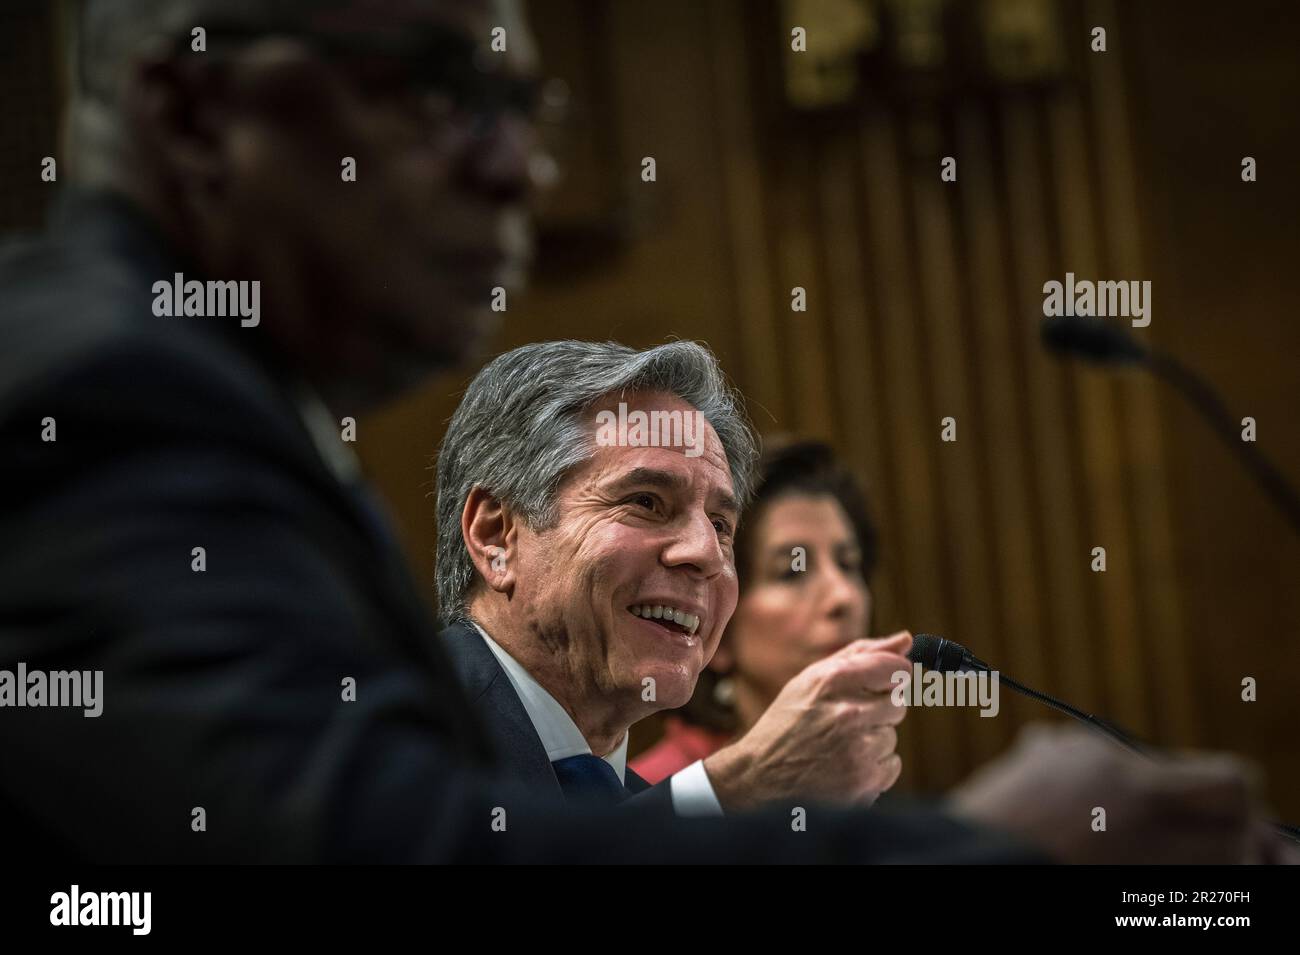 Arlington, United States Of America. 16th May, 2023. Arlington, United States of America. 16 May, 2023. U.S. Secretary of State Tony Blinken, center, smiles during testimony at the Senate Appropriations Committee hearings discussing the U.S.- China Relationship as it effects the Fiscal Year 24 Budget on Capitol Hill, May 16, 2023 in Washington, DC Blinken was joined by Secretary of Defense Lloyd Austin, left, and Secretary of Commerce Gina Raimondo, right. Credit: Chad McNeeley/DOD/Alamy Live News Stock Photo